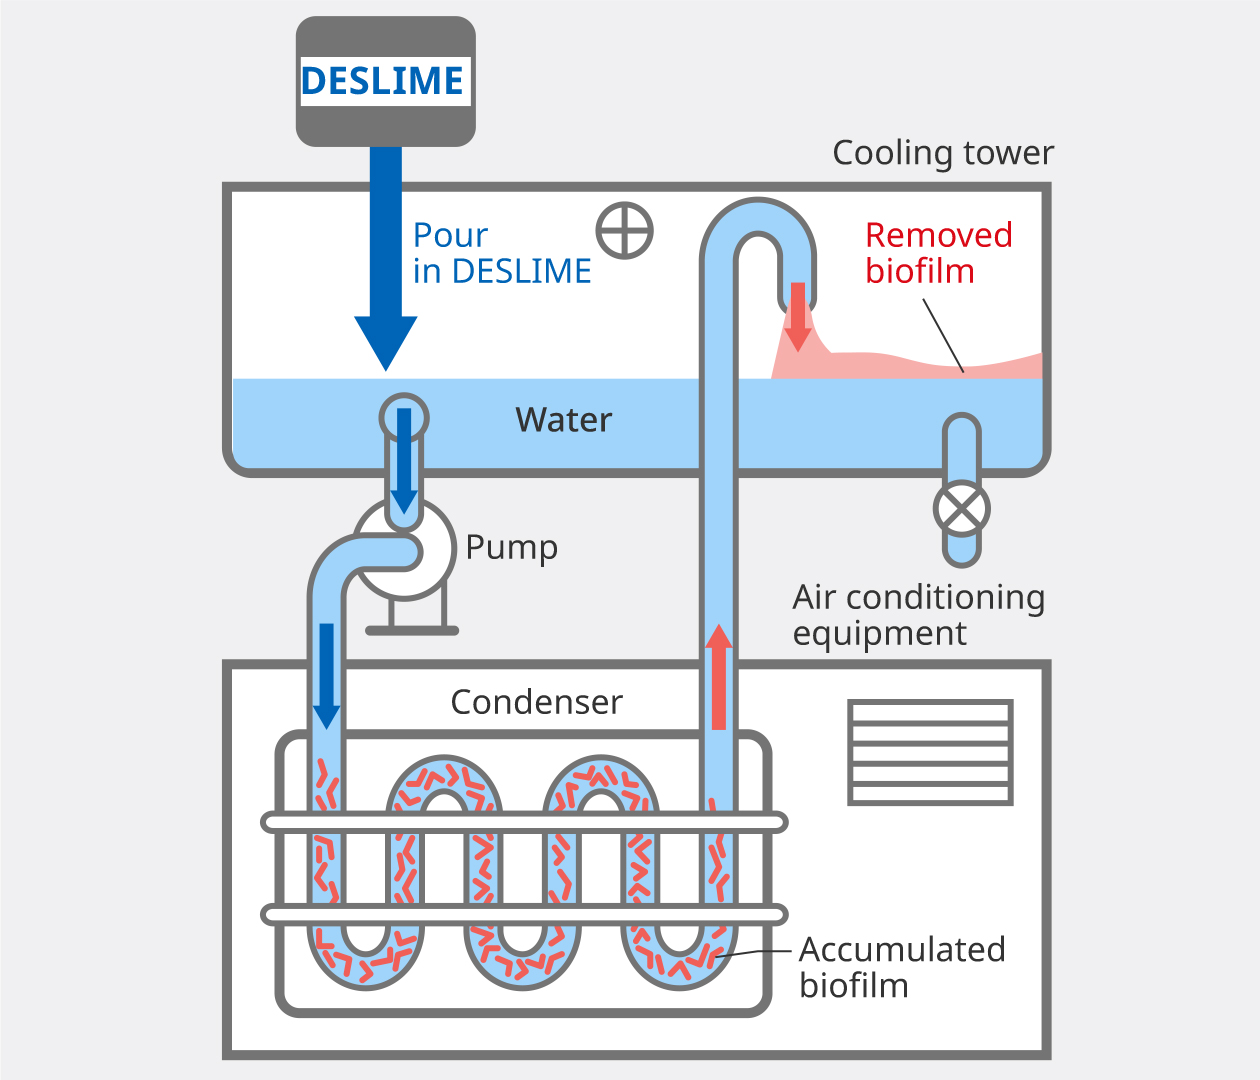 Figure: Explanatory diagram for the total system cleaning method. It explains the flow of the total system cleaning method by pouring in DESLIME.